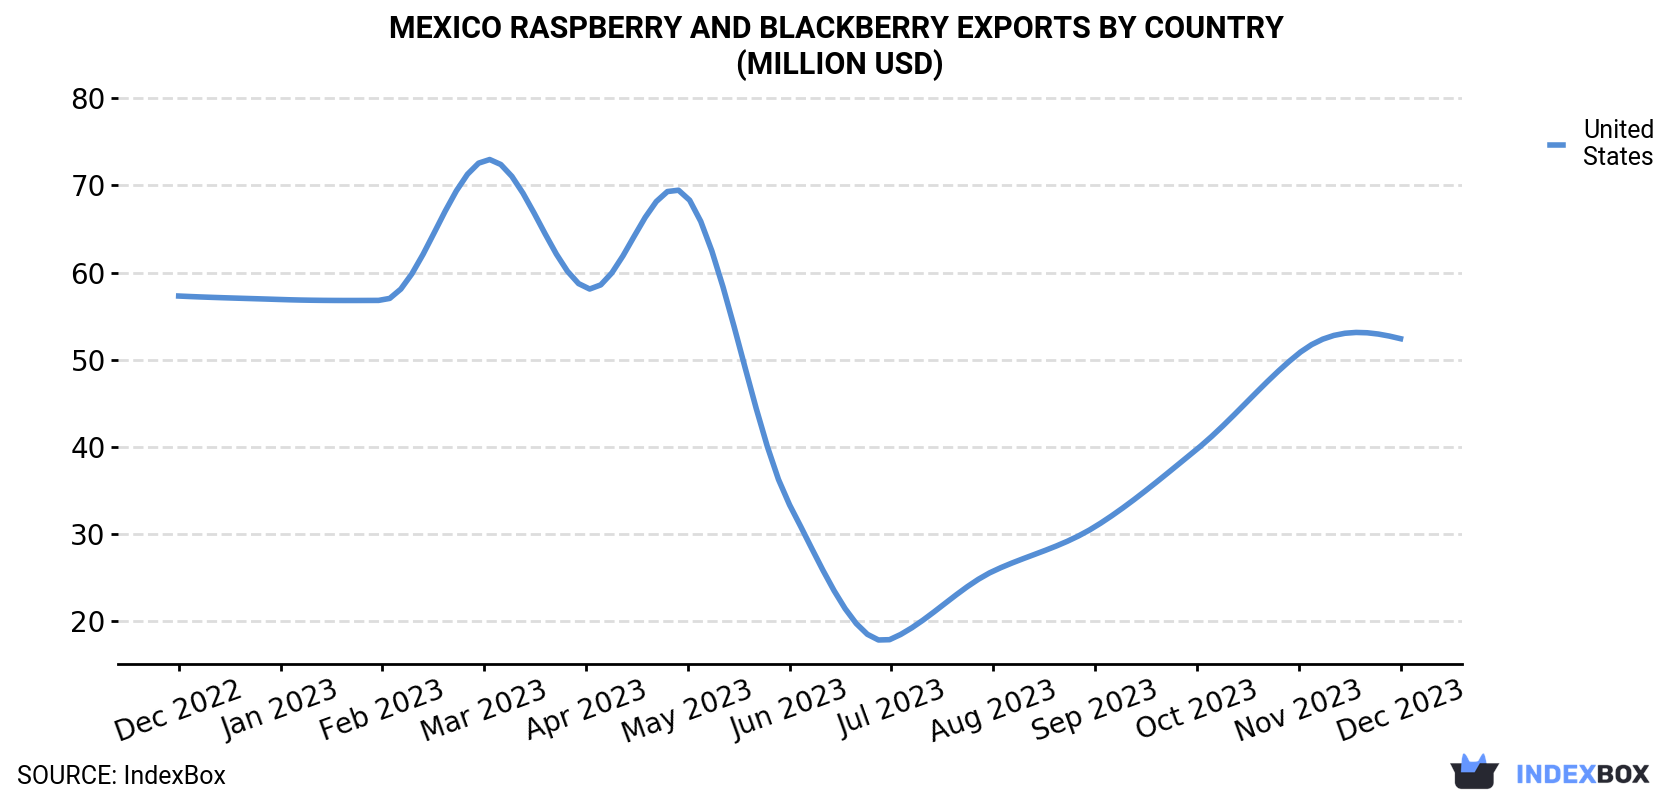 Mexico Raspberry And Blackberry Exports By Country (Million USD)